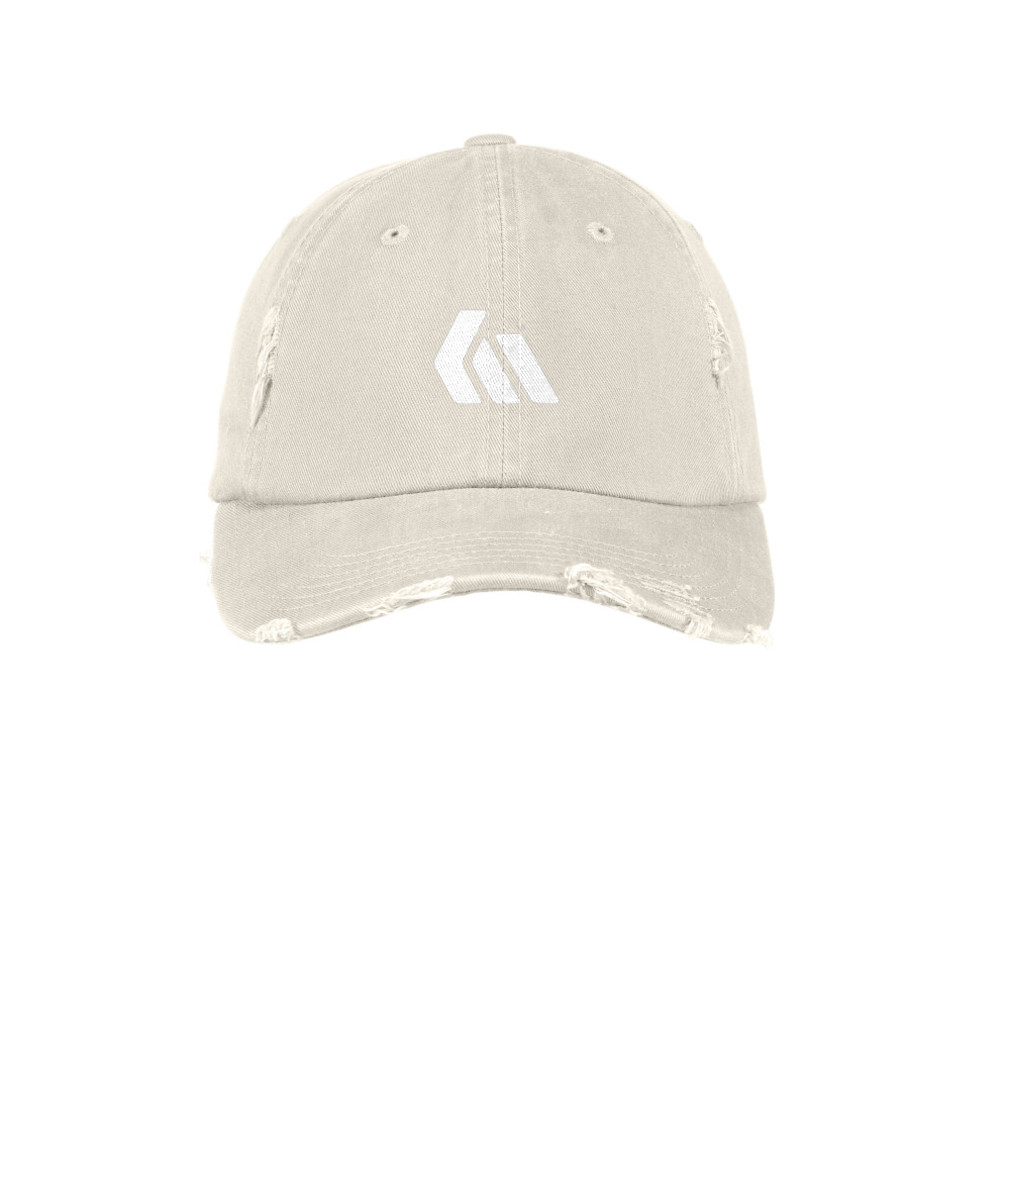 Keith Mason Embroidered Distressed Cap